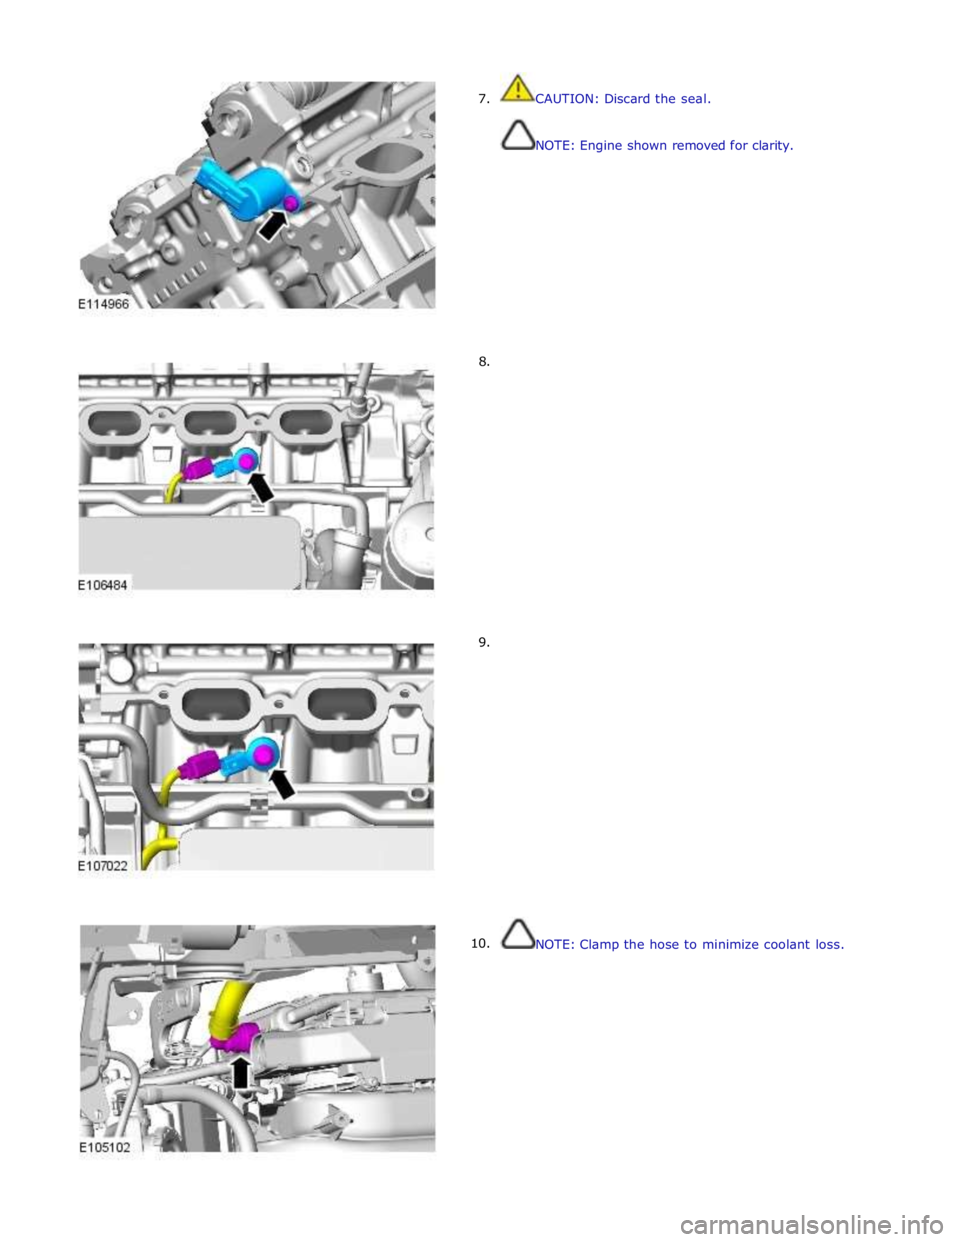 JAGUAR XFR 2010 1.G Workshop Manual  
7. 
 
 
 
 
 
 
 
 
 
 
 
 
 
 
 
 
        8. 
        9. 
10. CAUTION: Discard the seal. 
 
 
NOTE: Engine shown removed for clarity. 
 
 
 
 
 
 
 
 
 
 
 
 
 
 
 
 
 
 
 
 
 
 
 
 
 
 
 
 
 
 
 